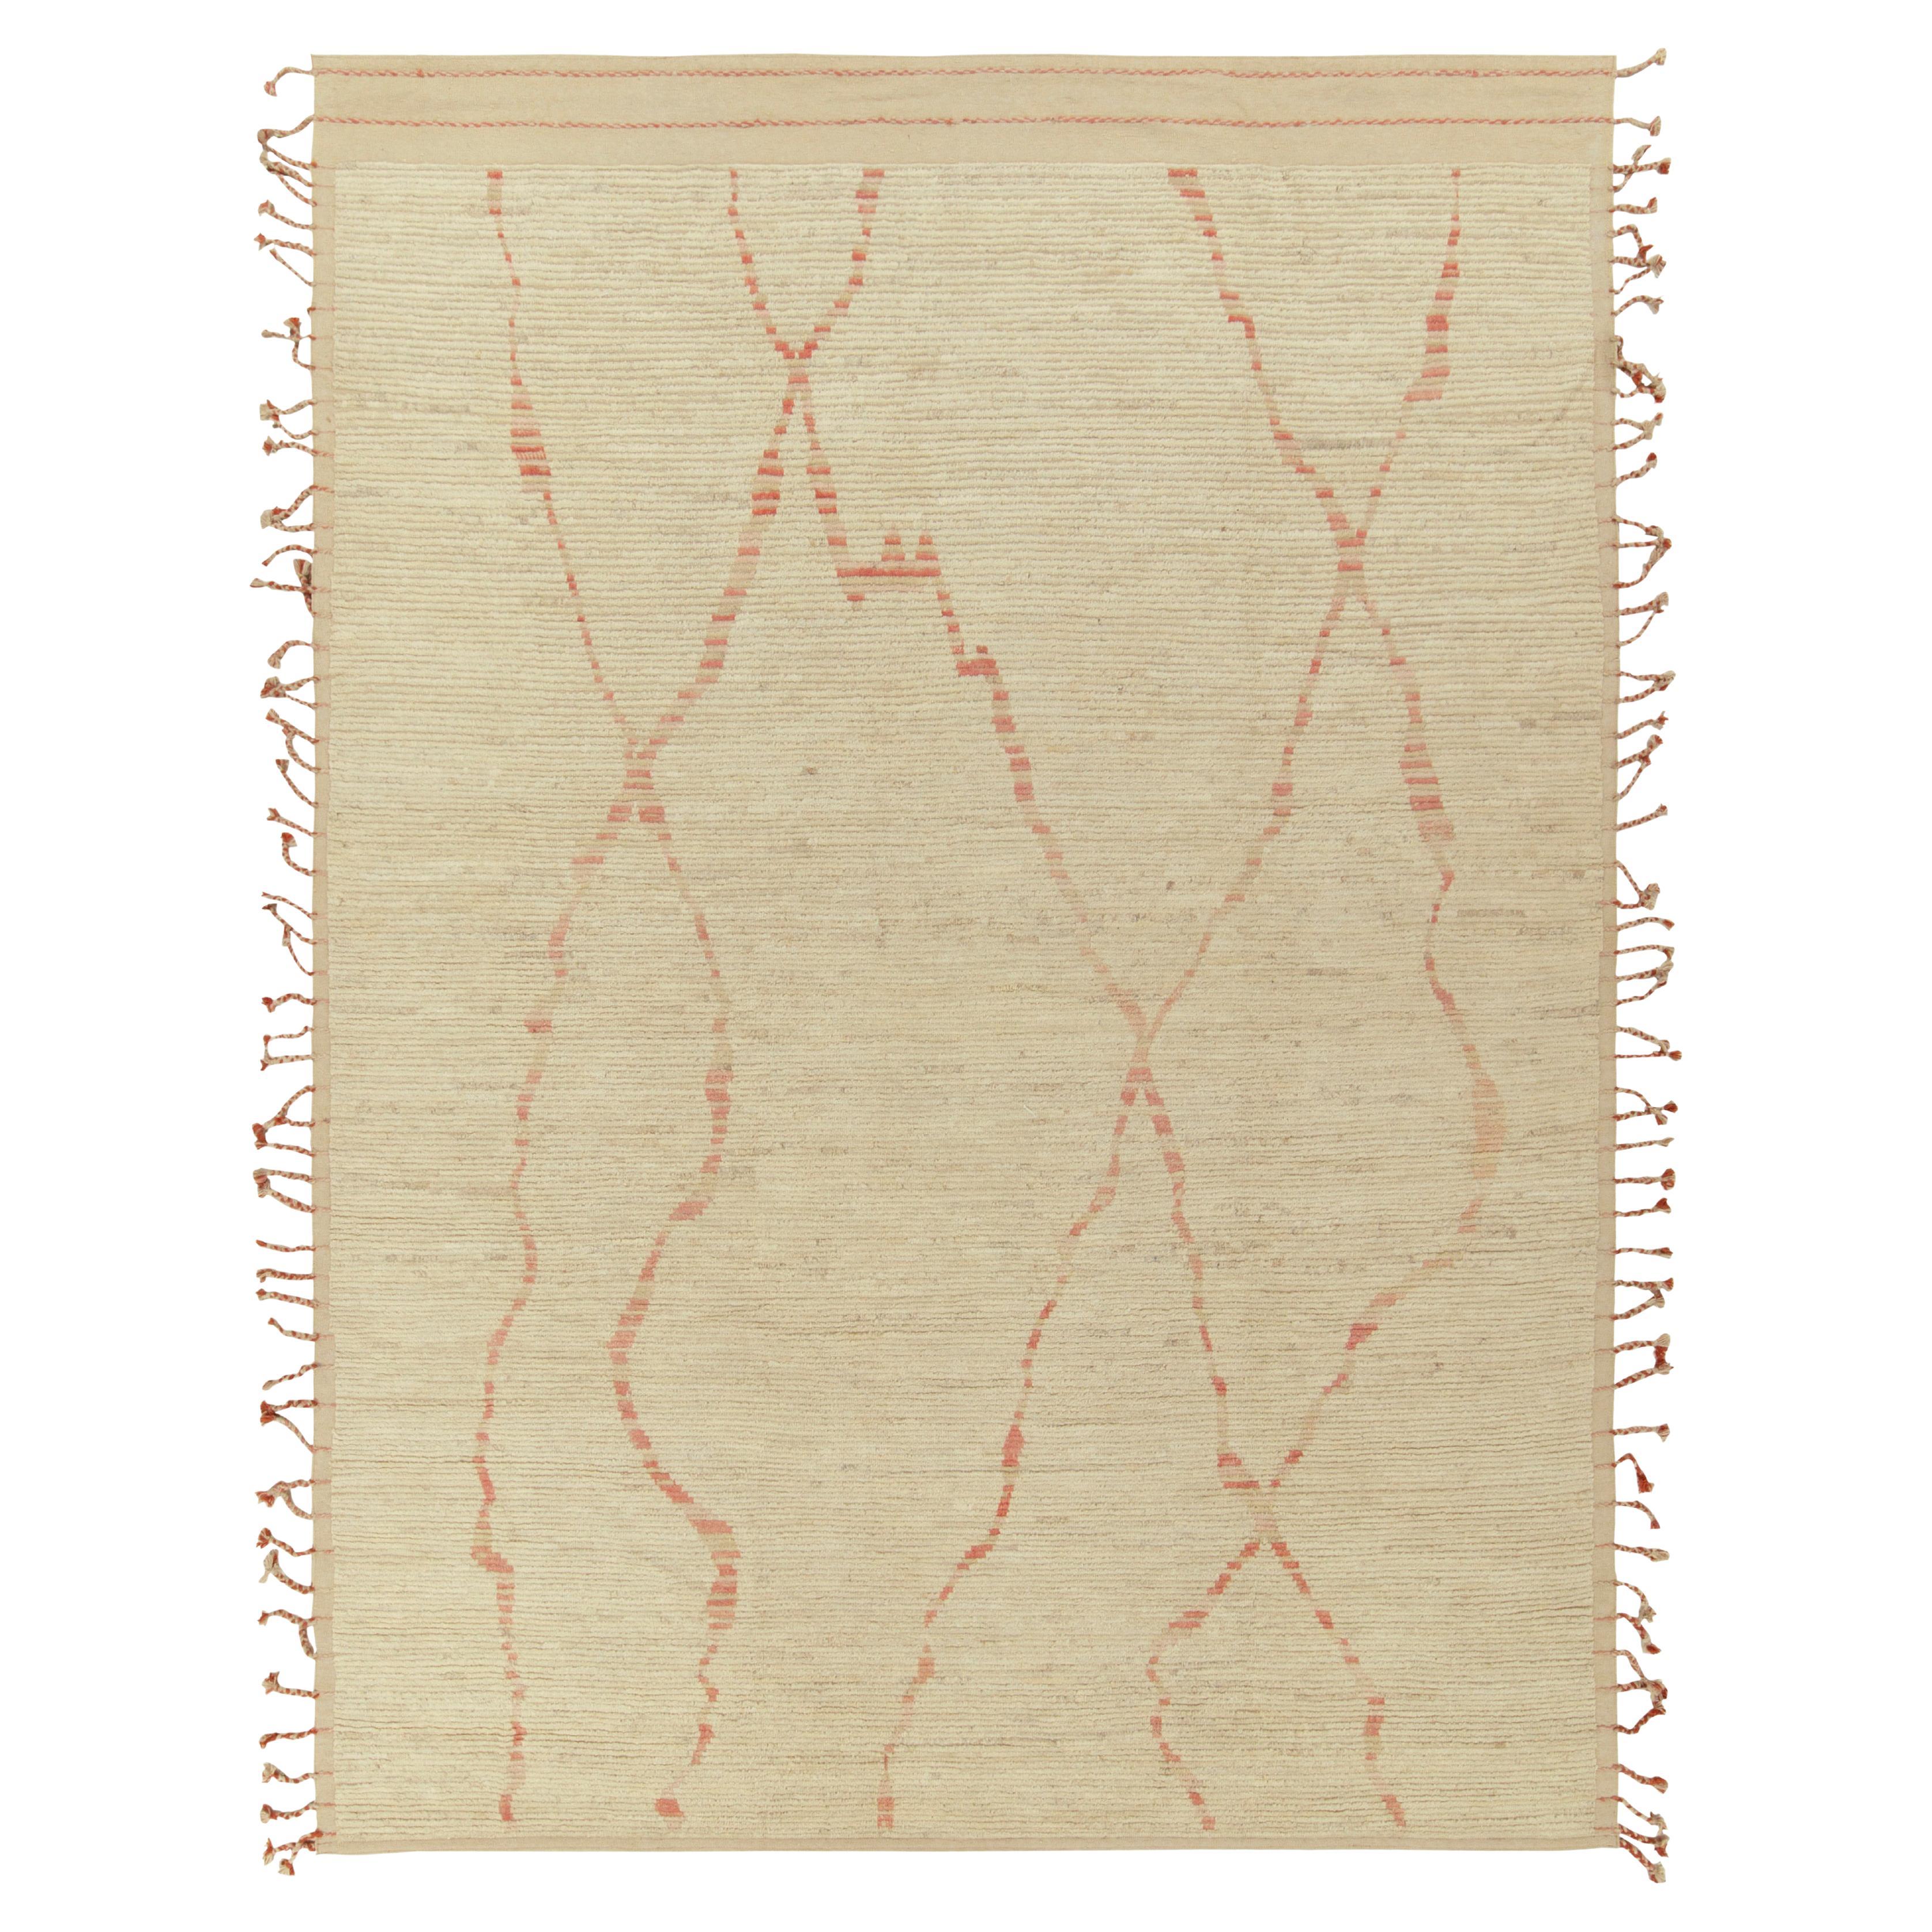 Rug & Kilim's Contemporary Moroccan Style Rug in Beige-White & Red For Sale